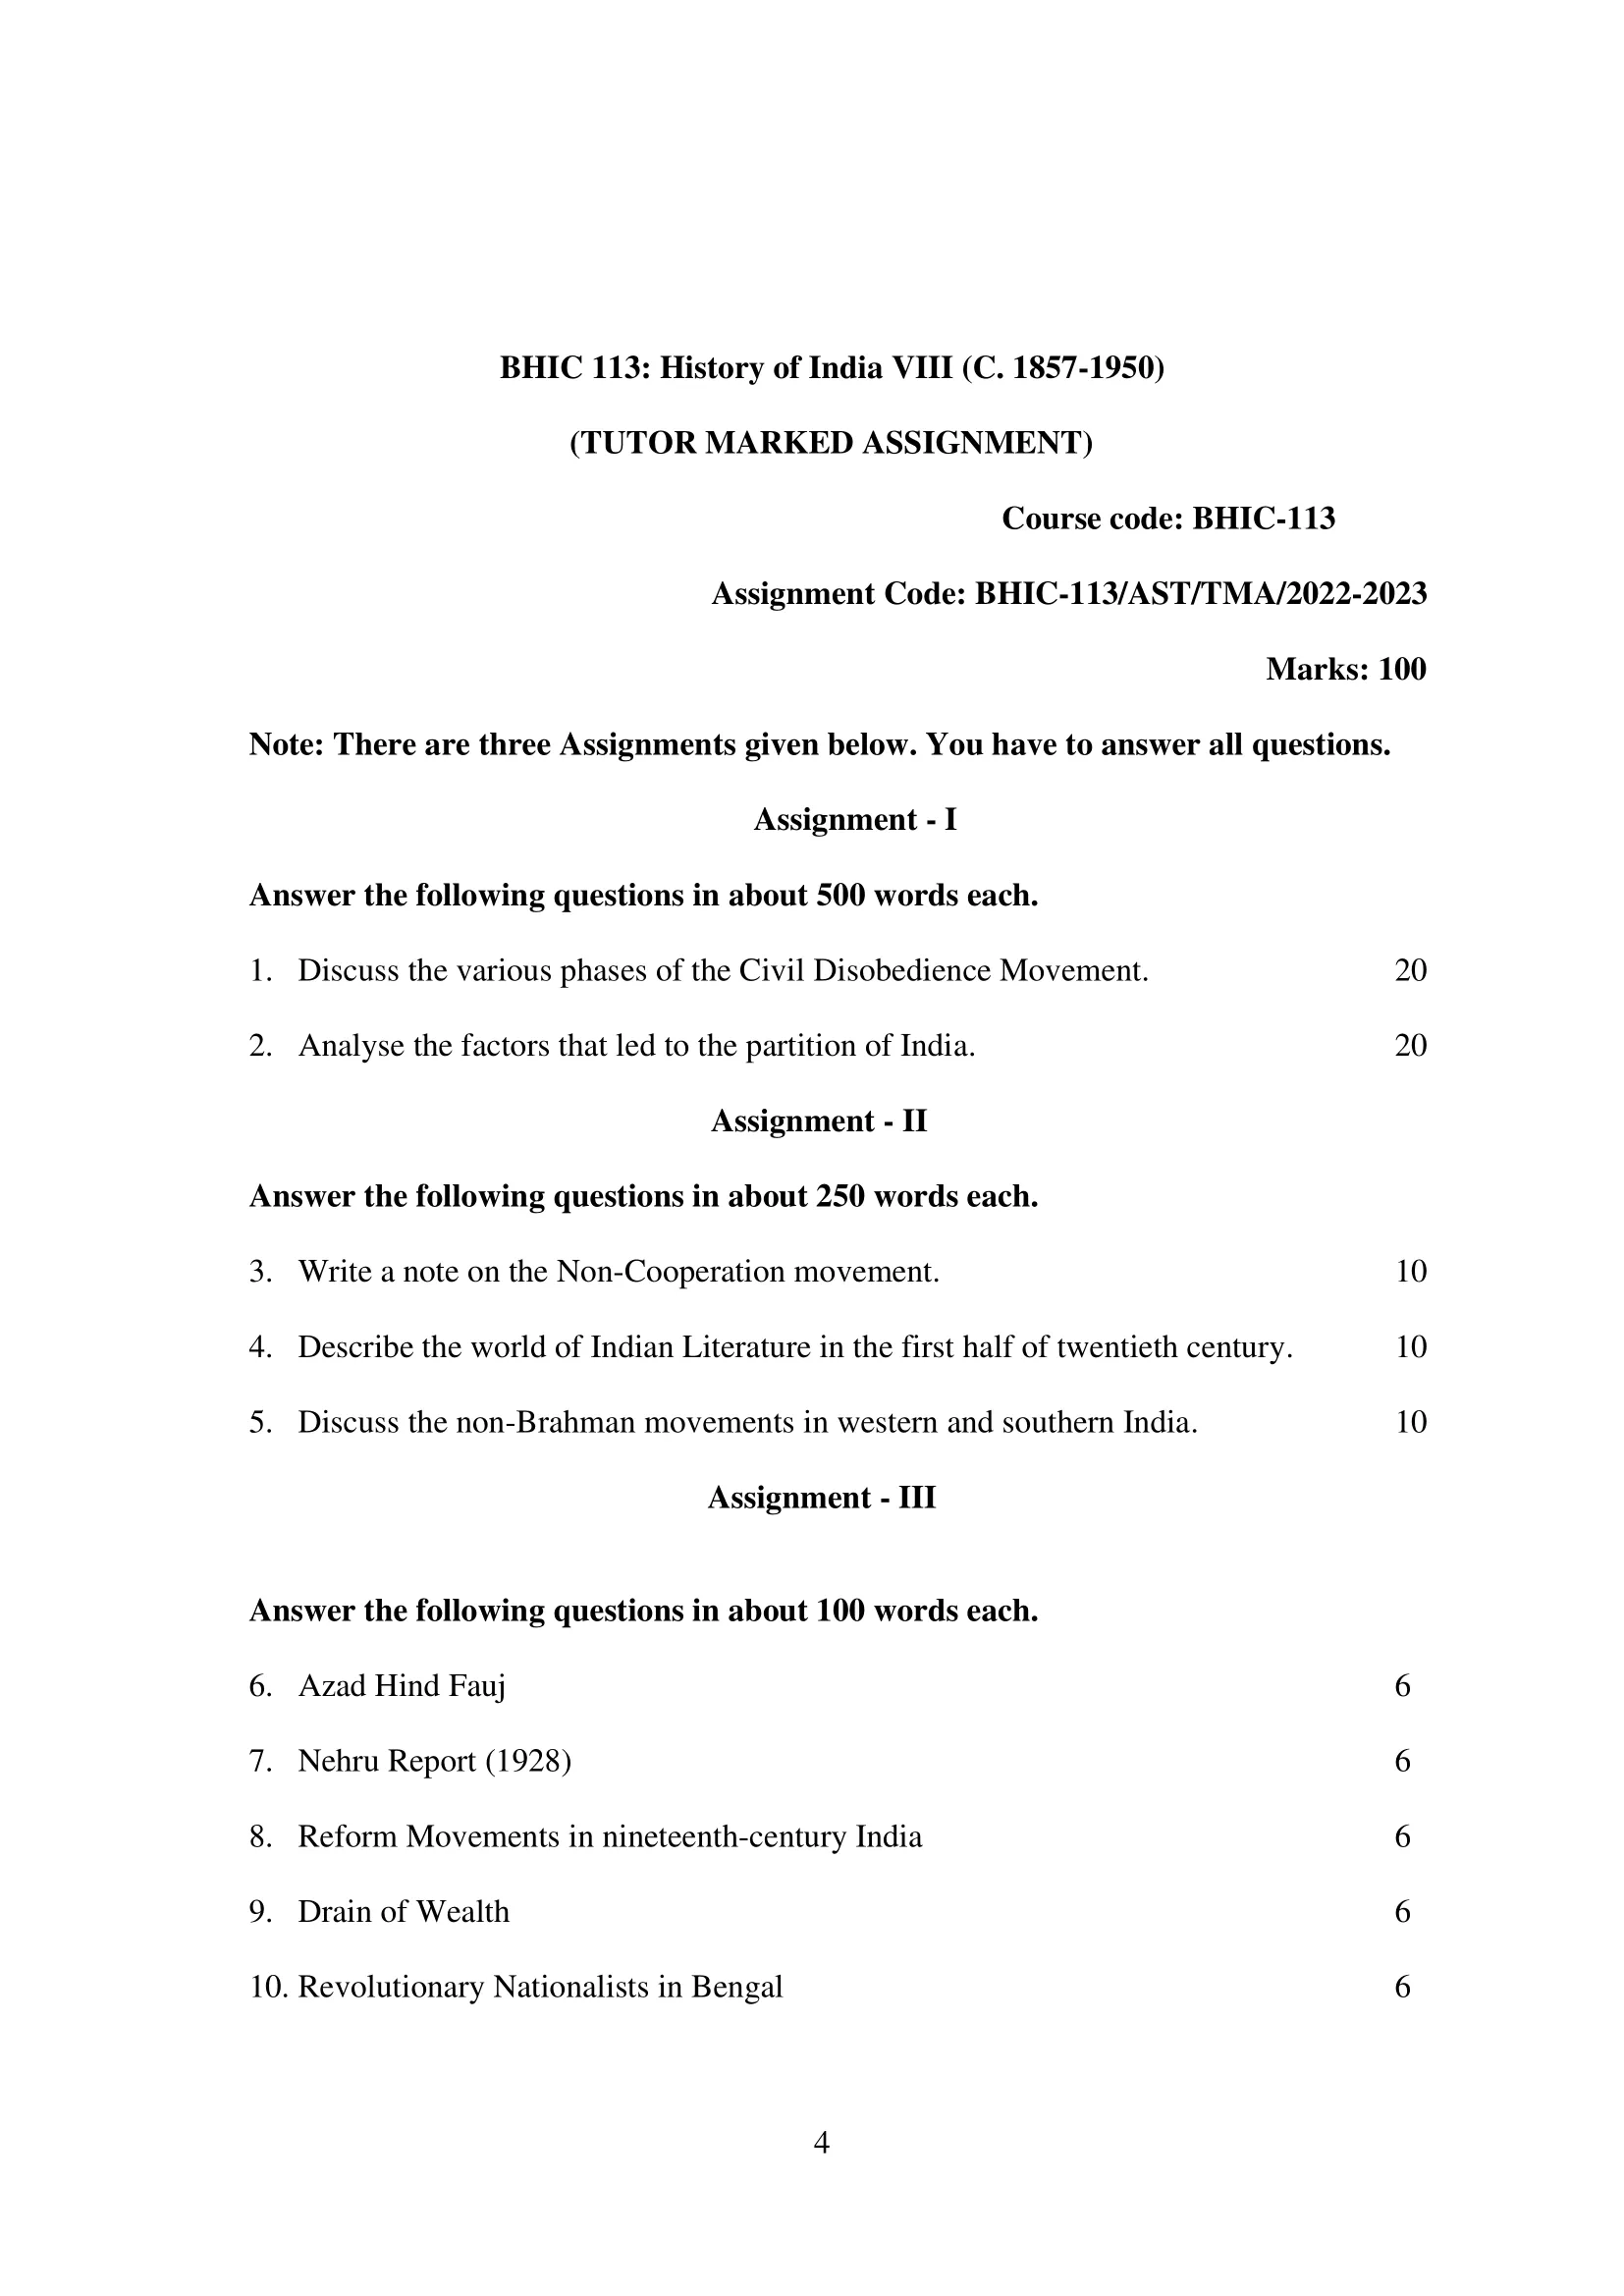 BHIC 113 IGNOU Solved Assignment 2022-2023  History of India-VIII 